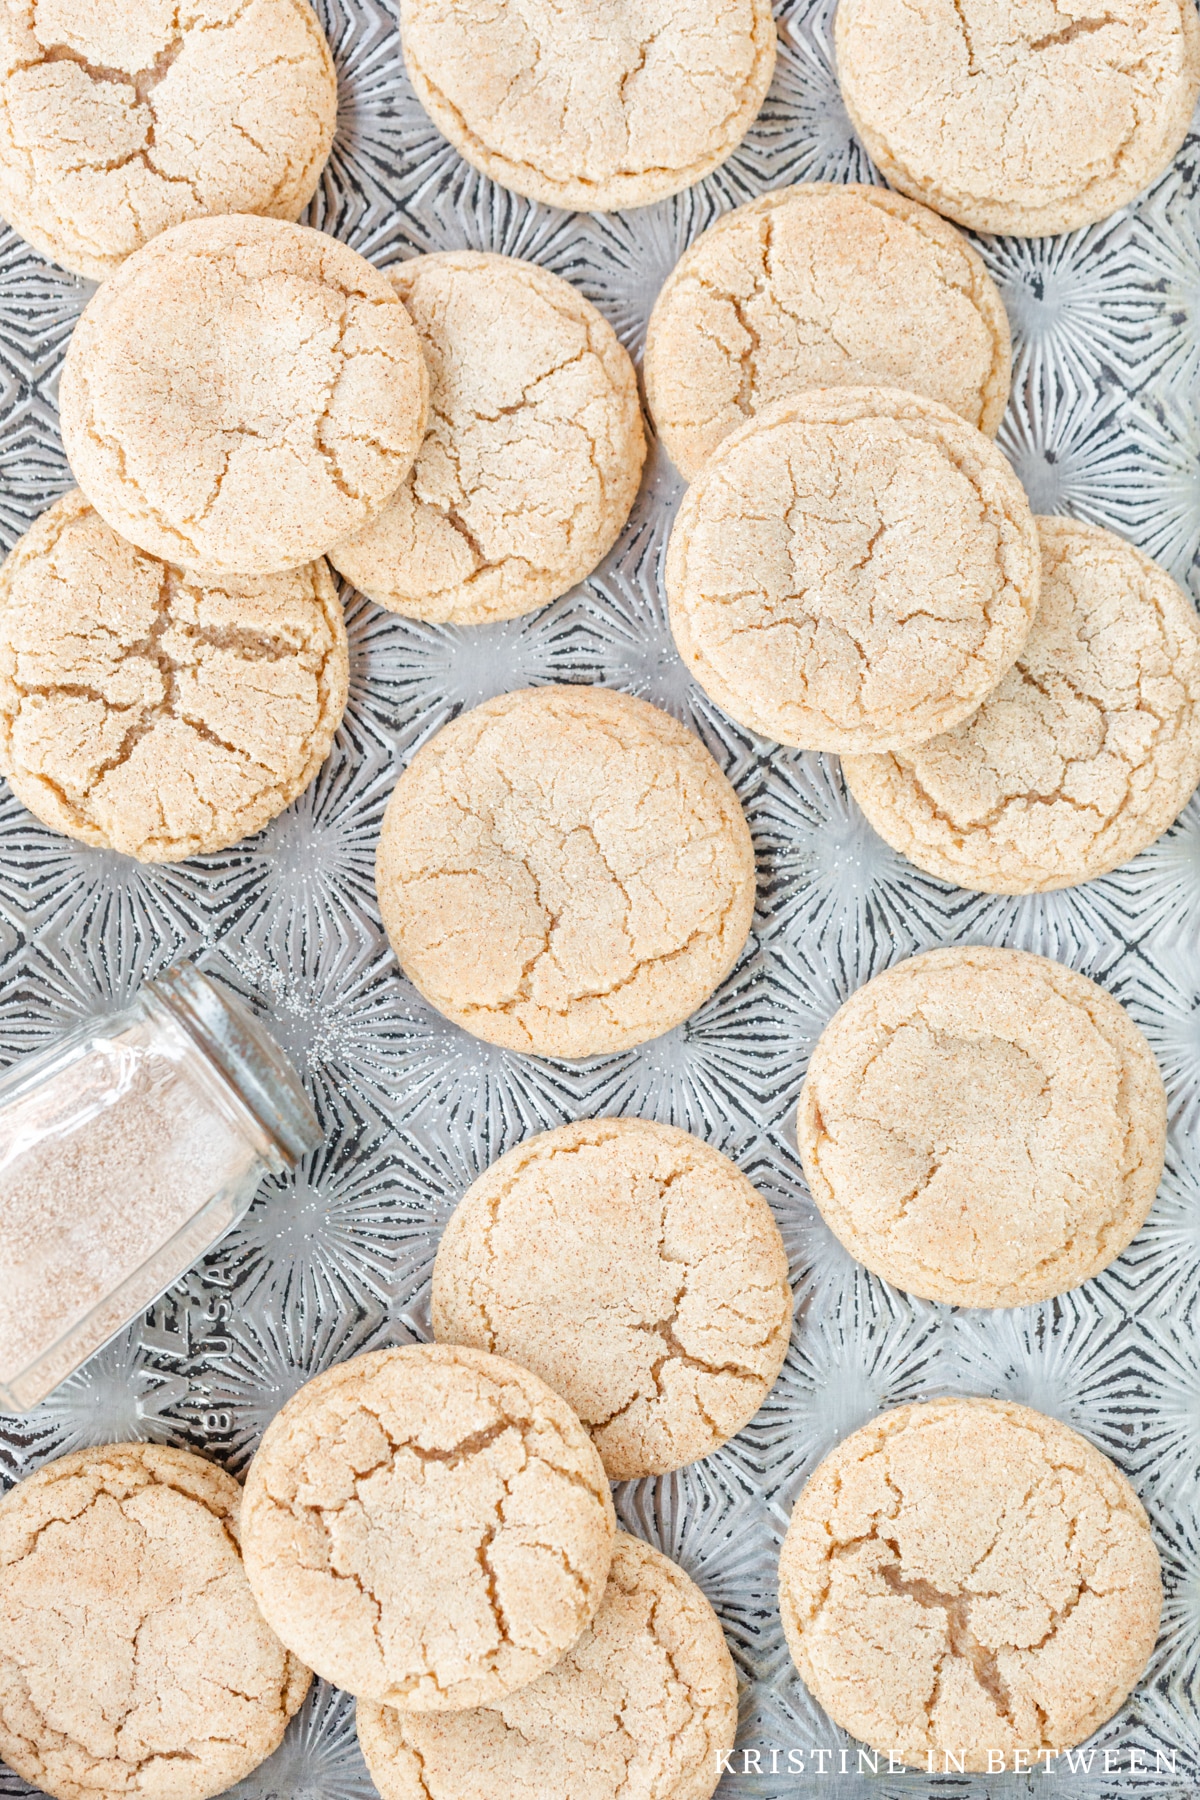 Cookies laying on an antique cookie sheet with a shaker full of sugar.